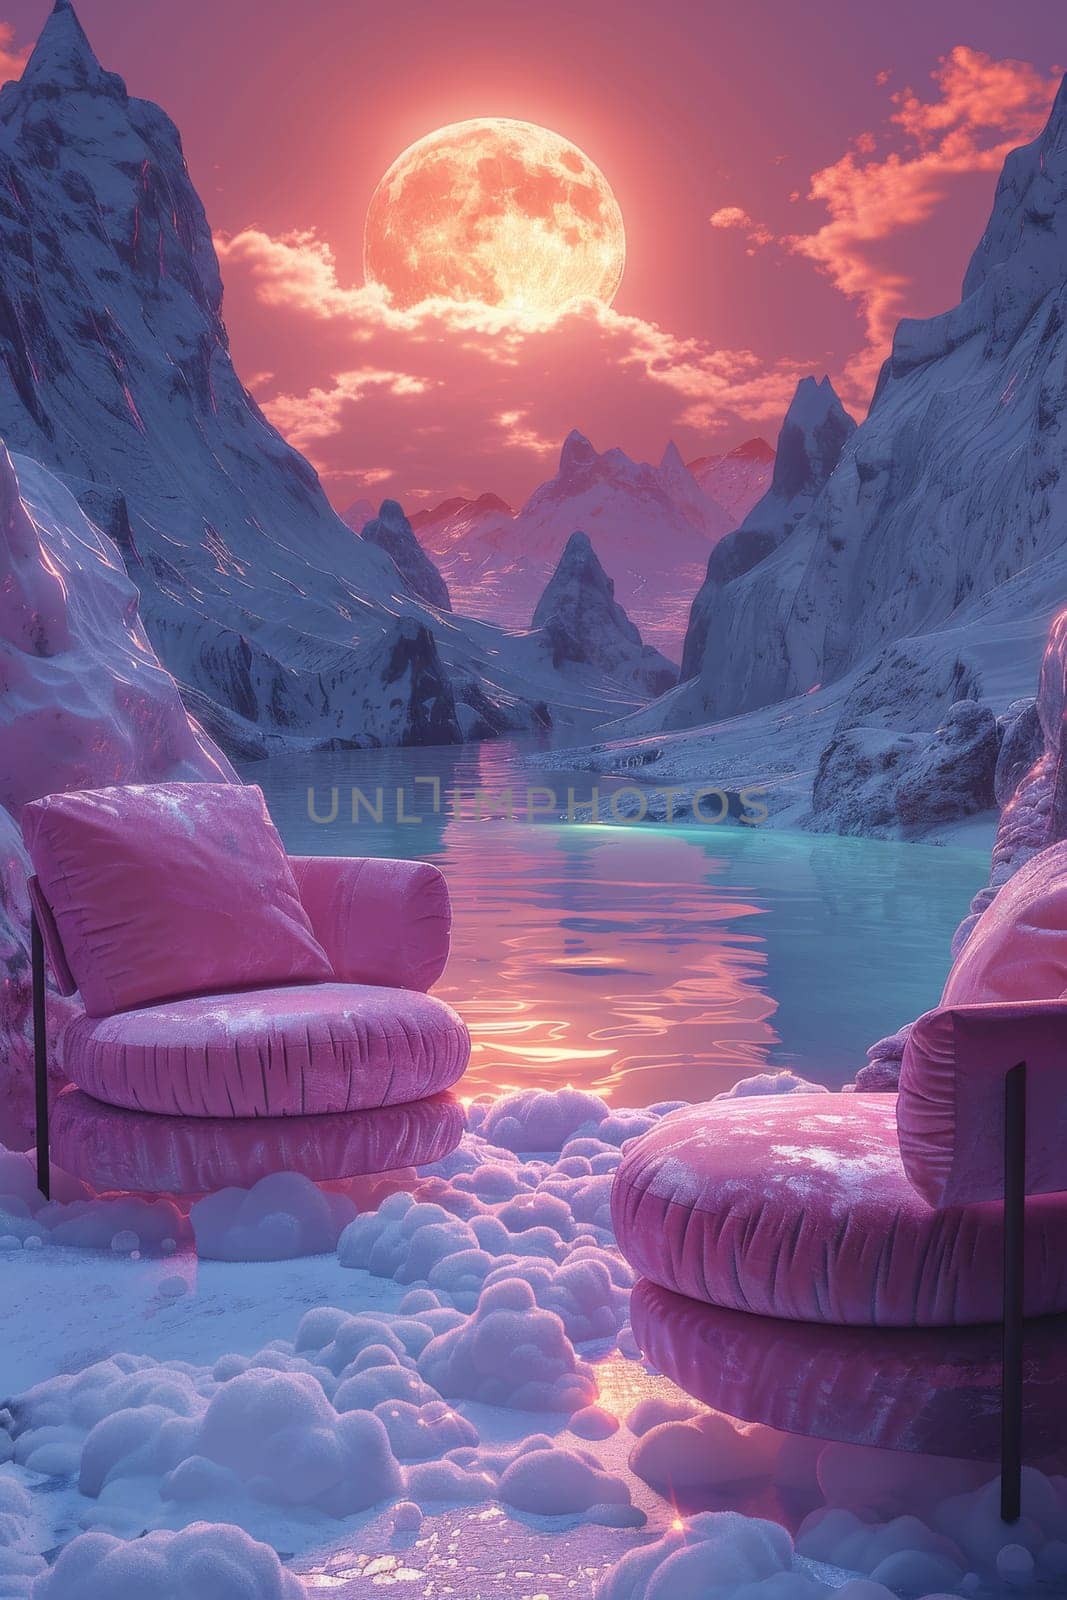 A pink couch is sitting on a table in a snowy mountain valley by itchaznong